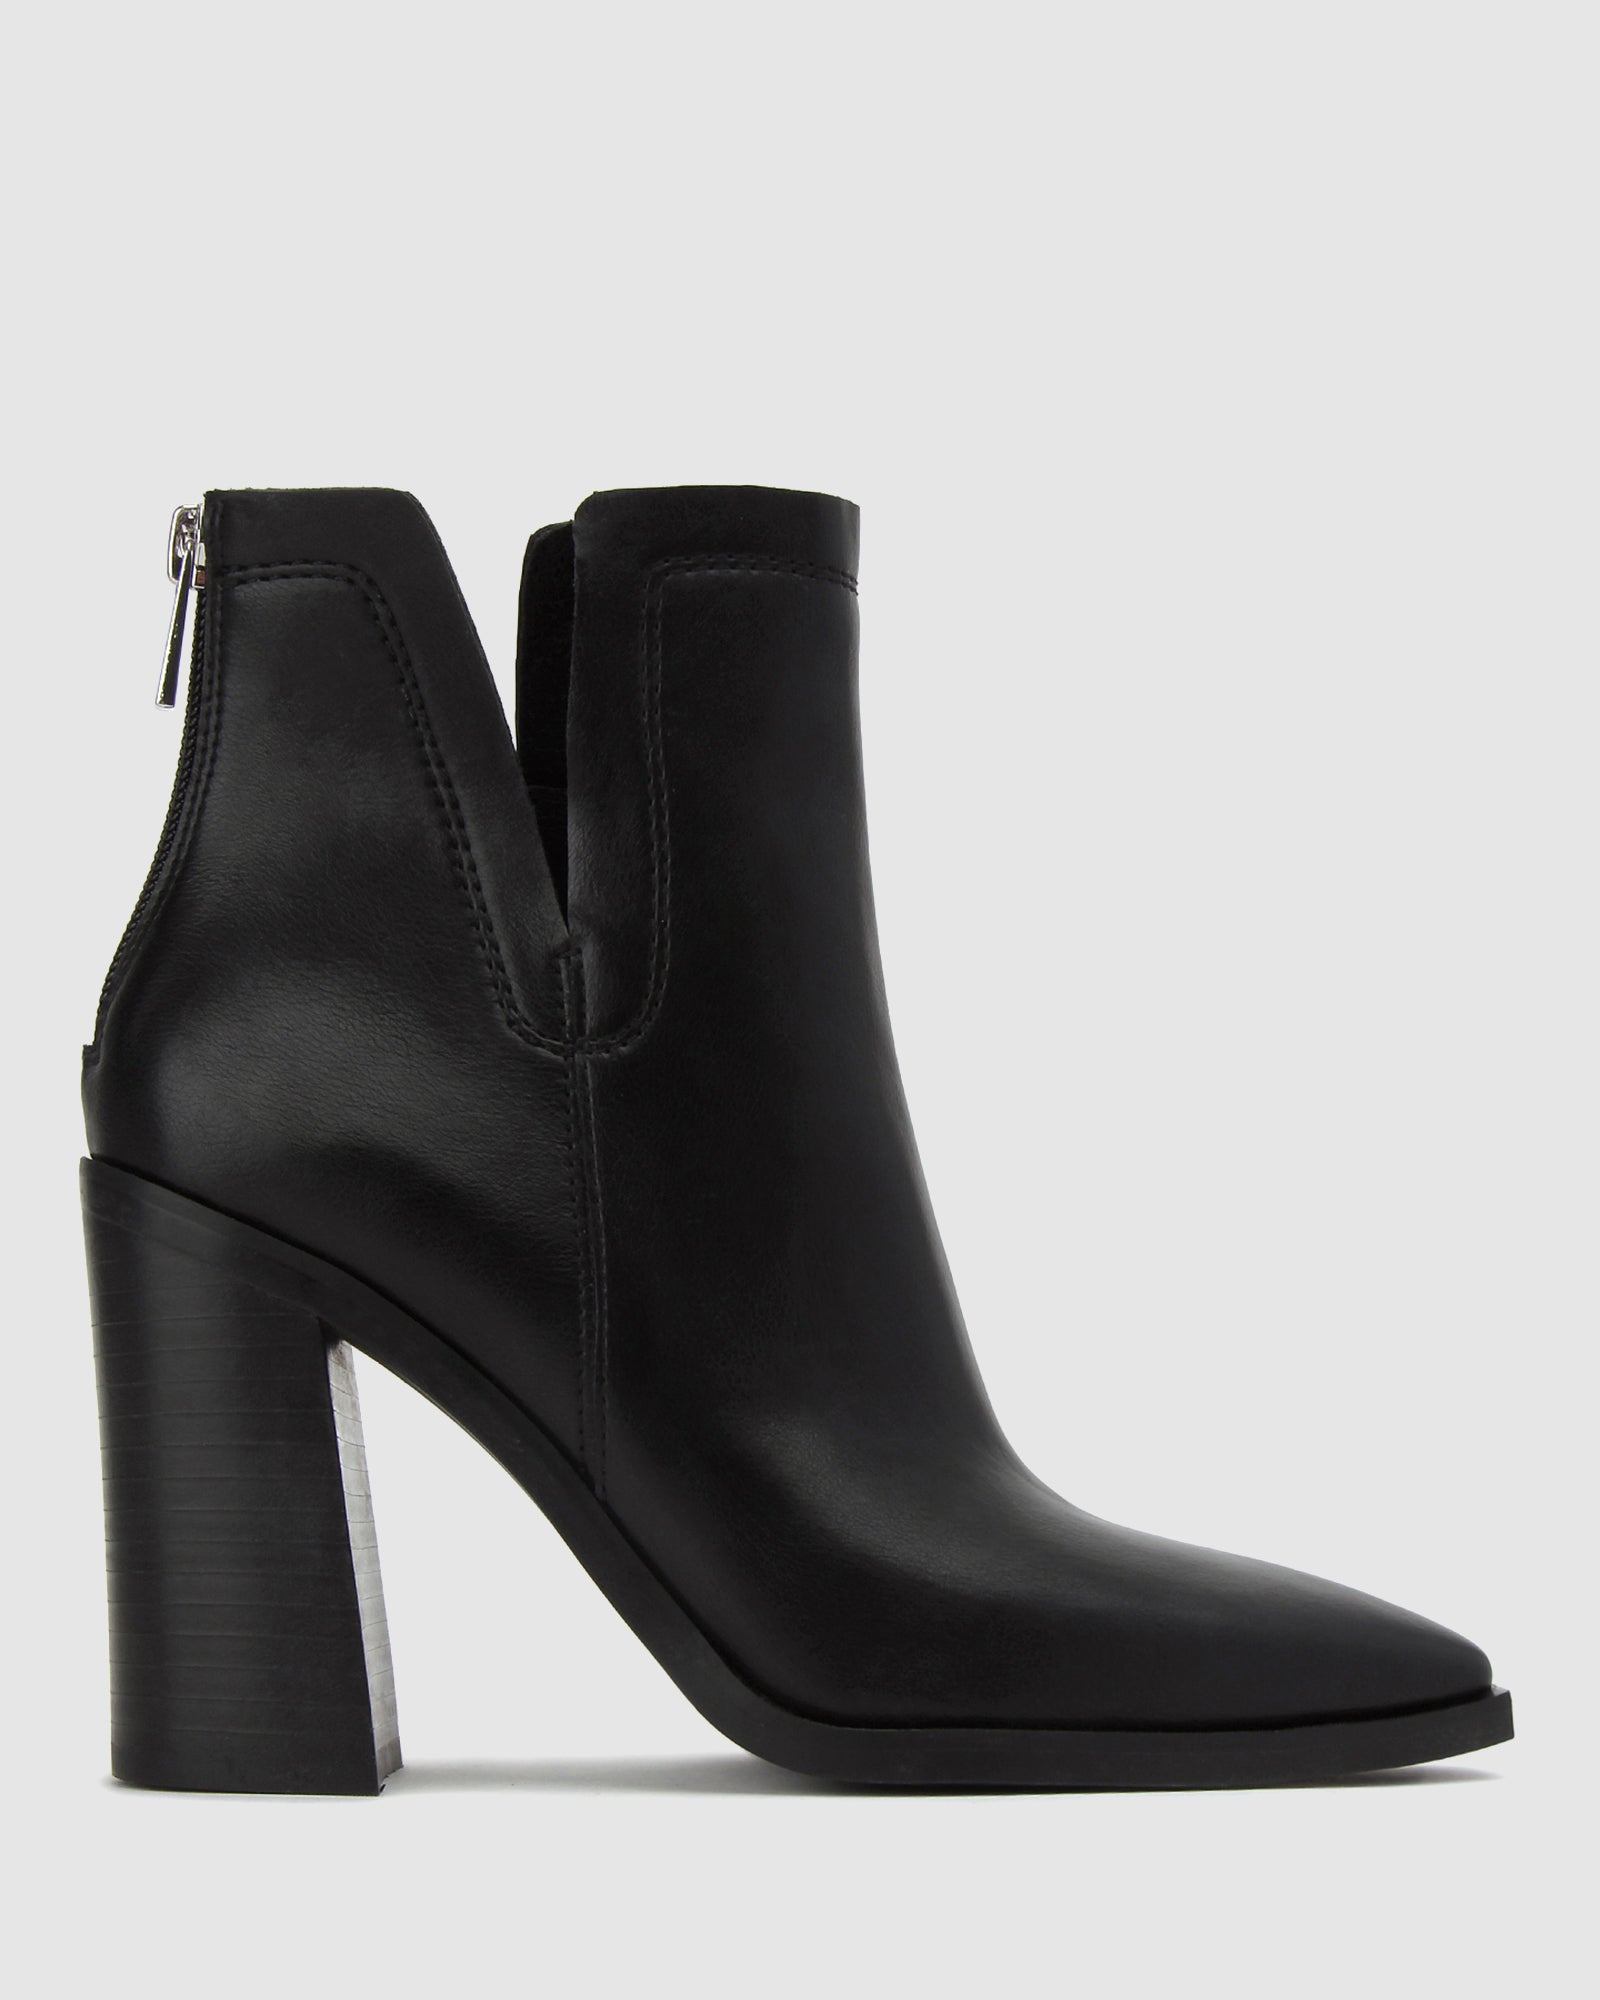 Buy DOM Point Toe Ankle Boots by Betts online - Betts